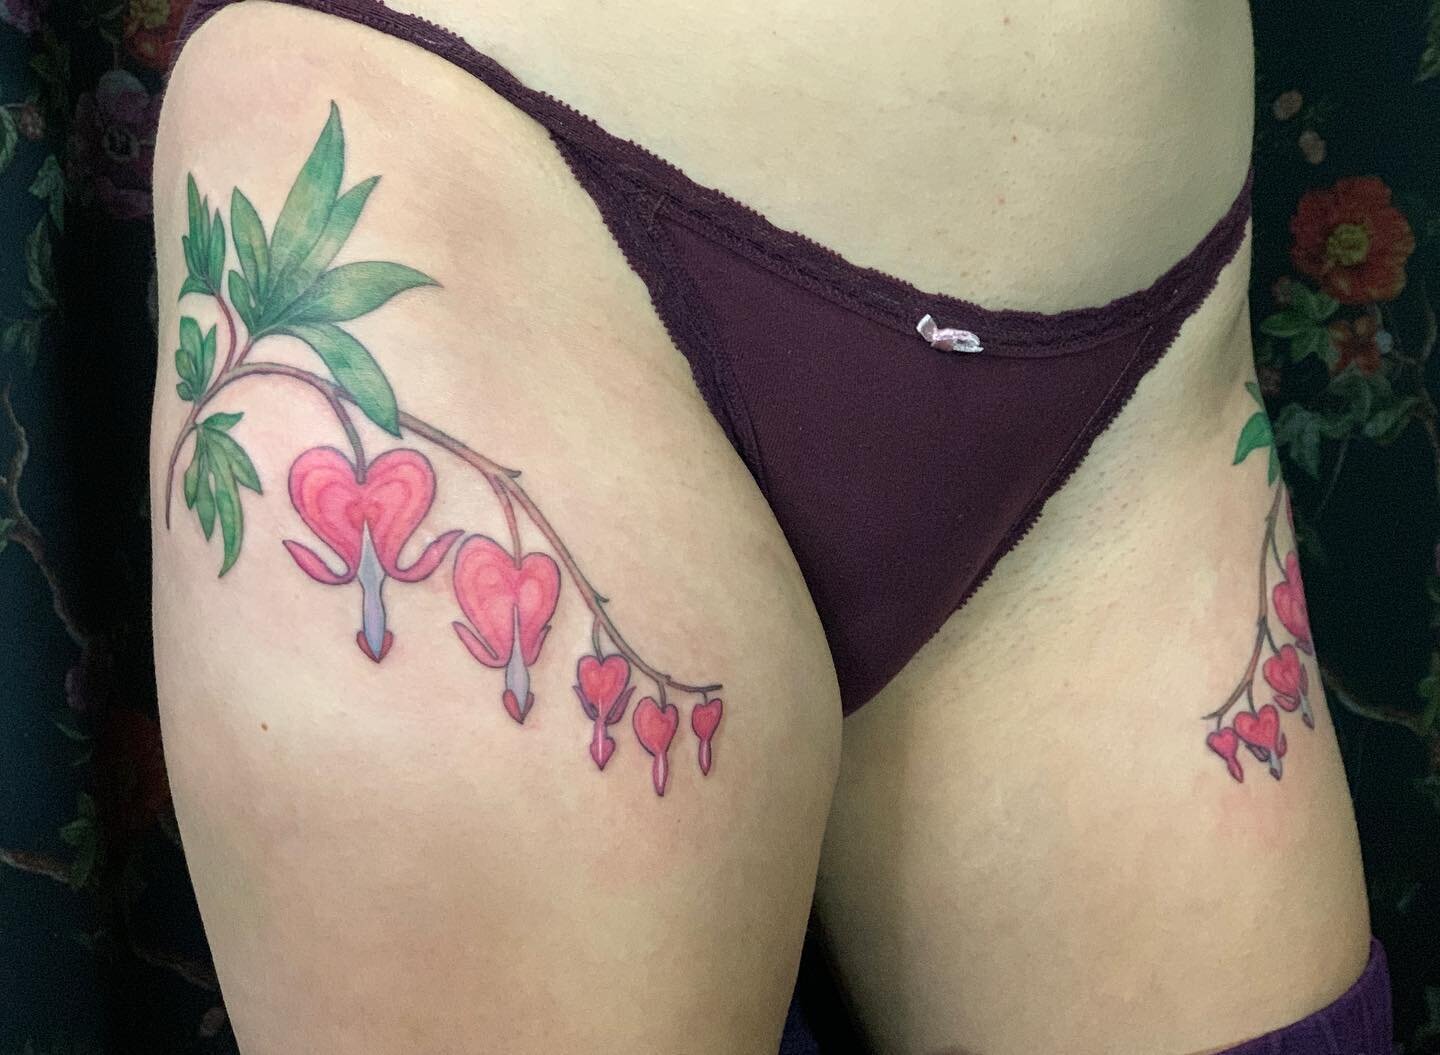 Two vines of bleeding hearts💗💗 Thank you Abby!
.
.
.
#bleedinghearttattoo #vinetattoo #bleedingheartflowertattoo #bleedingheartflower #botanicaltattoo #floraltattoo